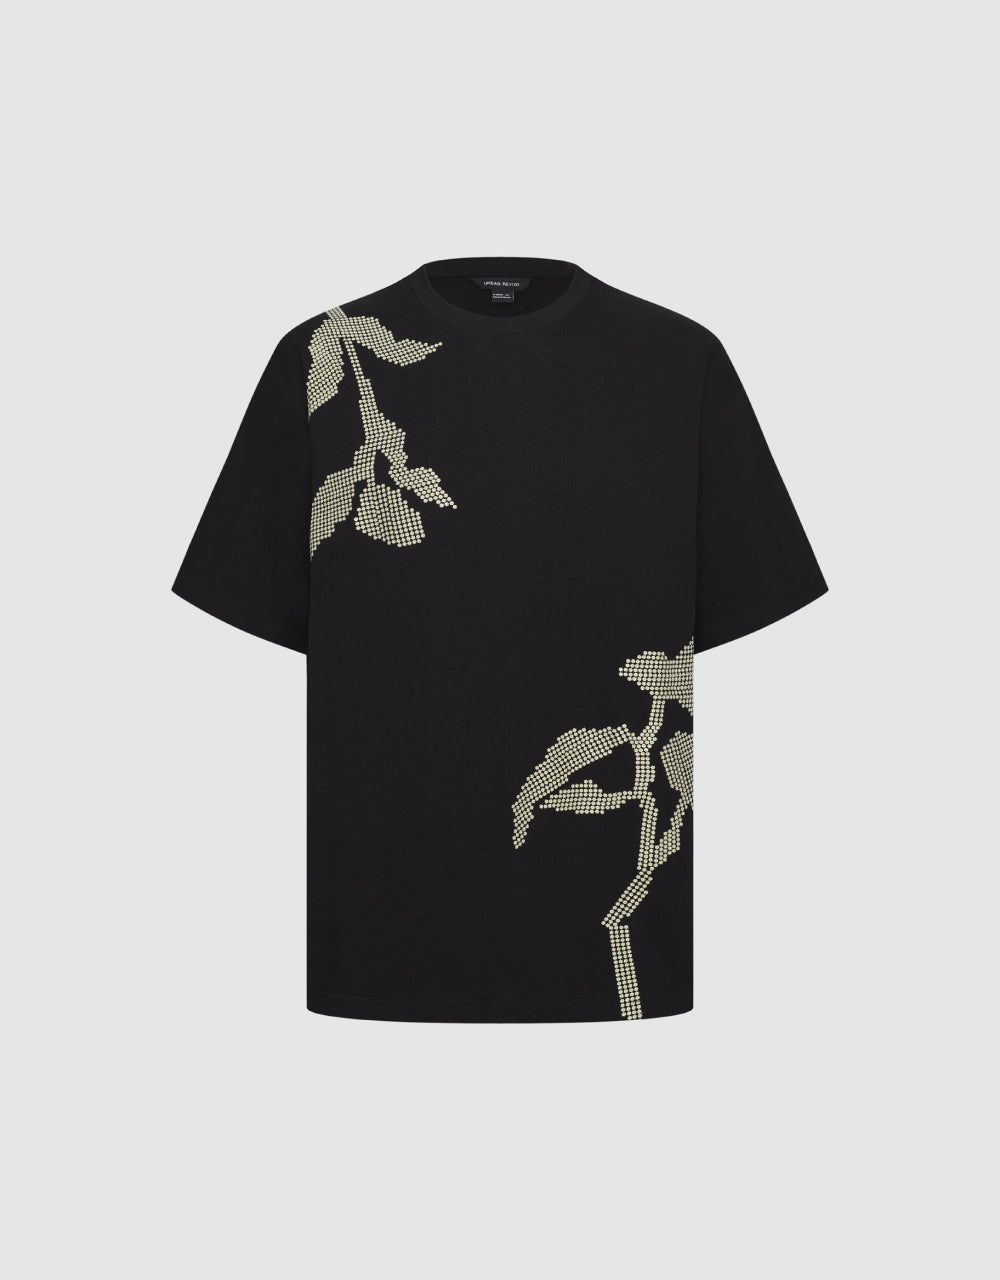 embroidered lv flower t-shirt